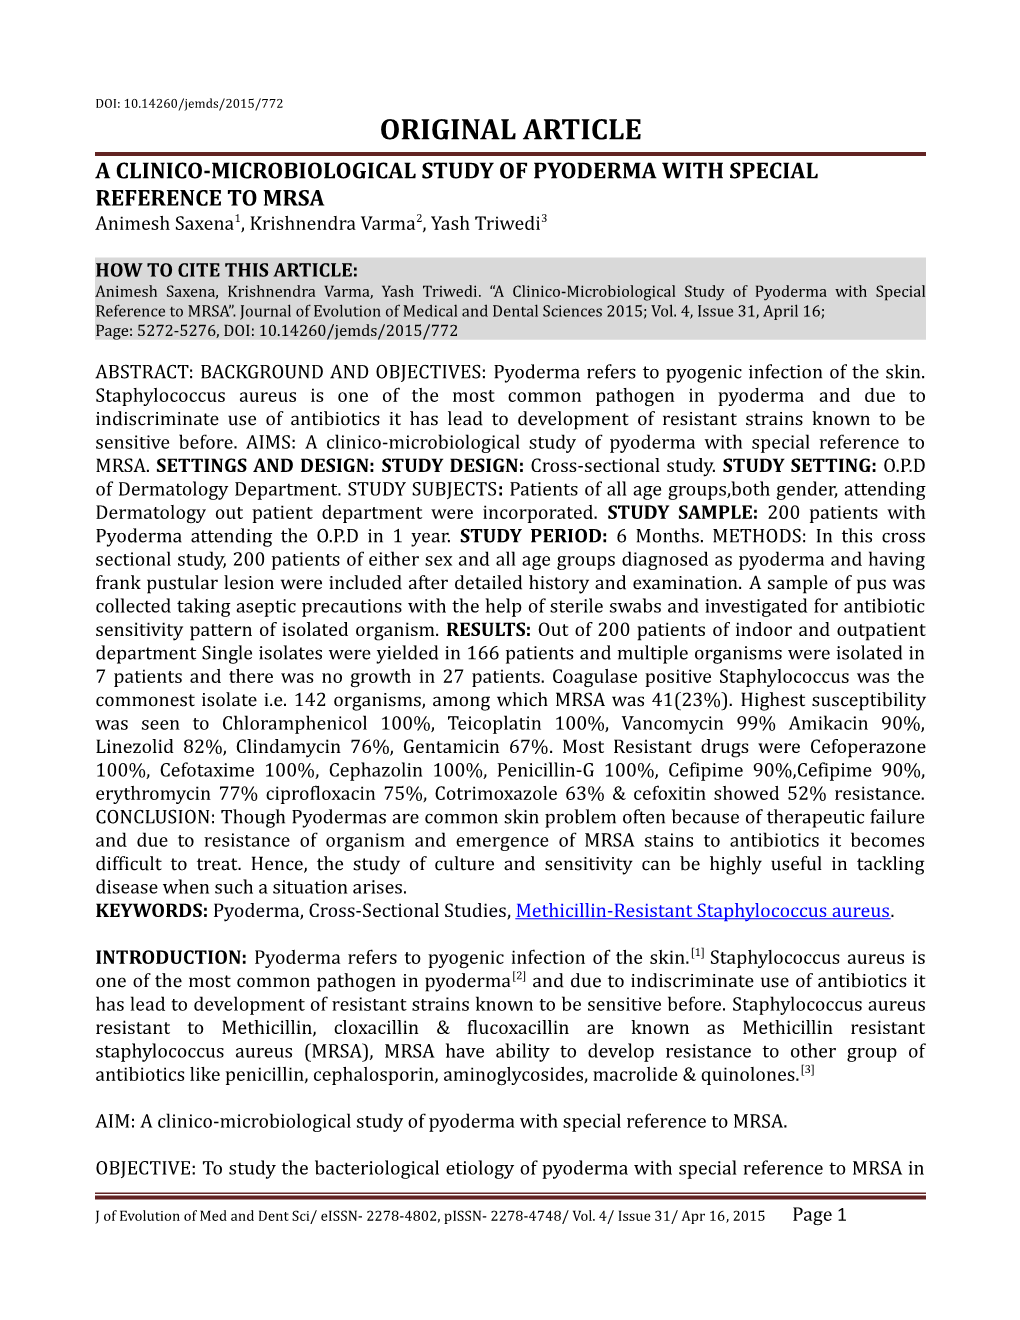 A Clinico-Microbiological Study of Pyoderma with Special Reference to Mrsa